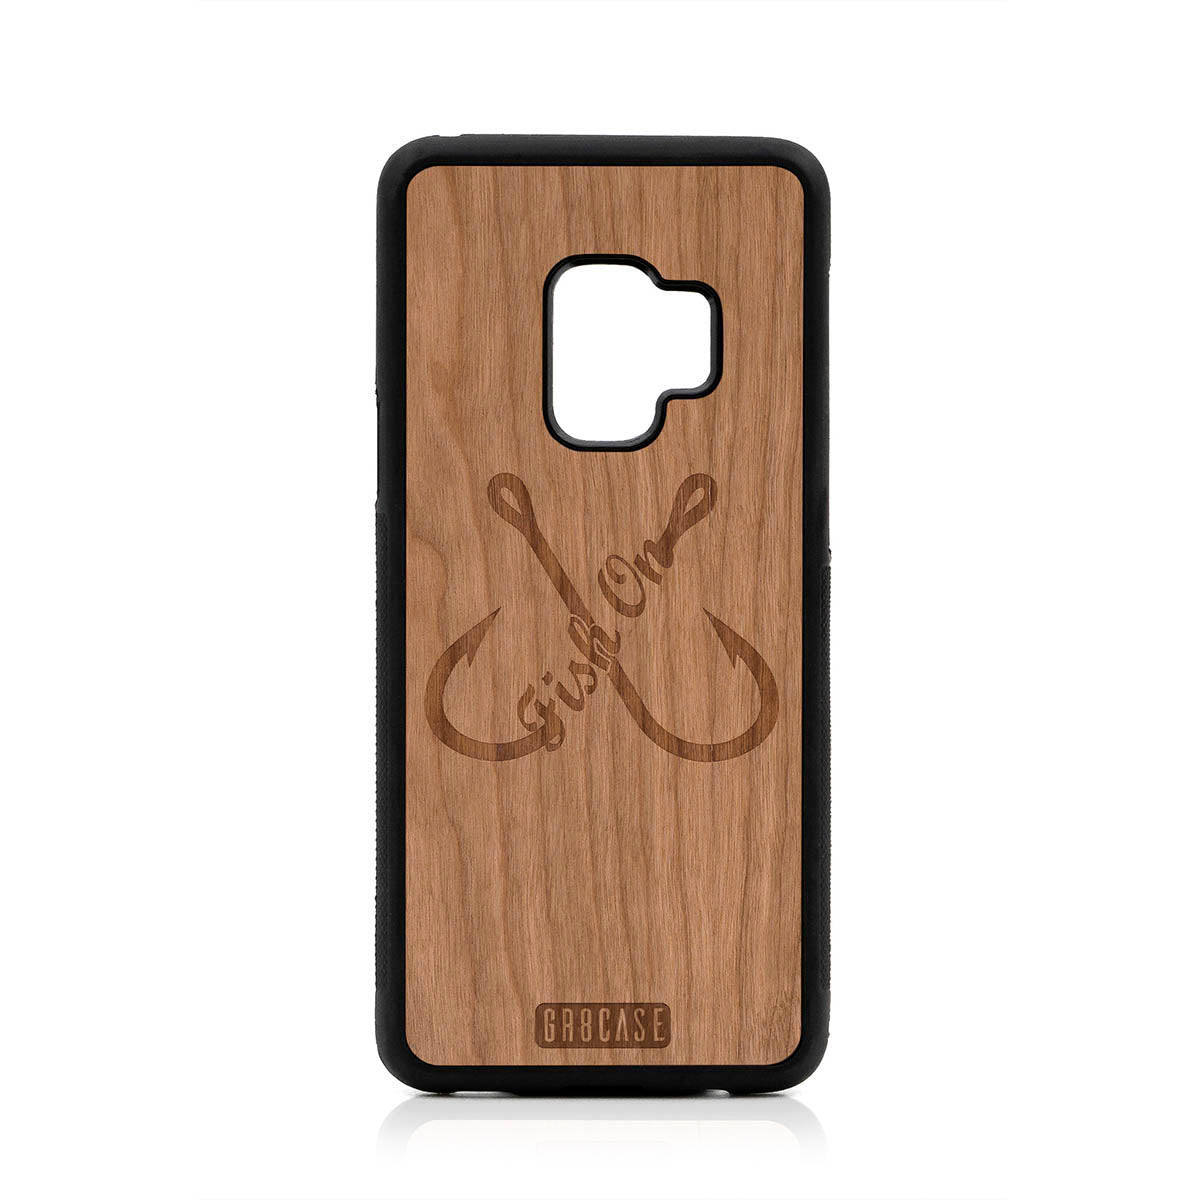 Fish On (Fish Hooks) Design Wood Case For Samsung Galaxy S9 by GR8CASE